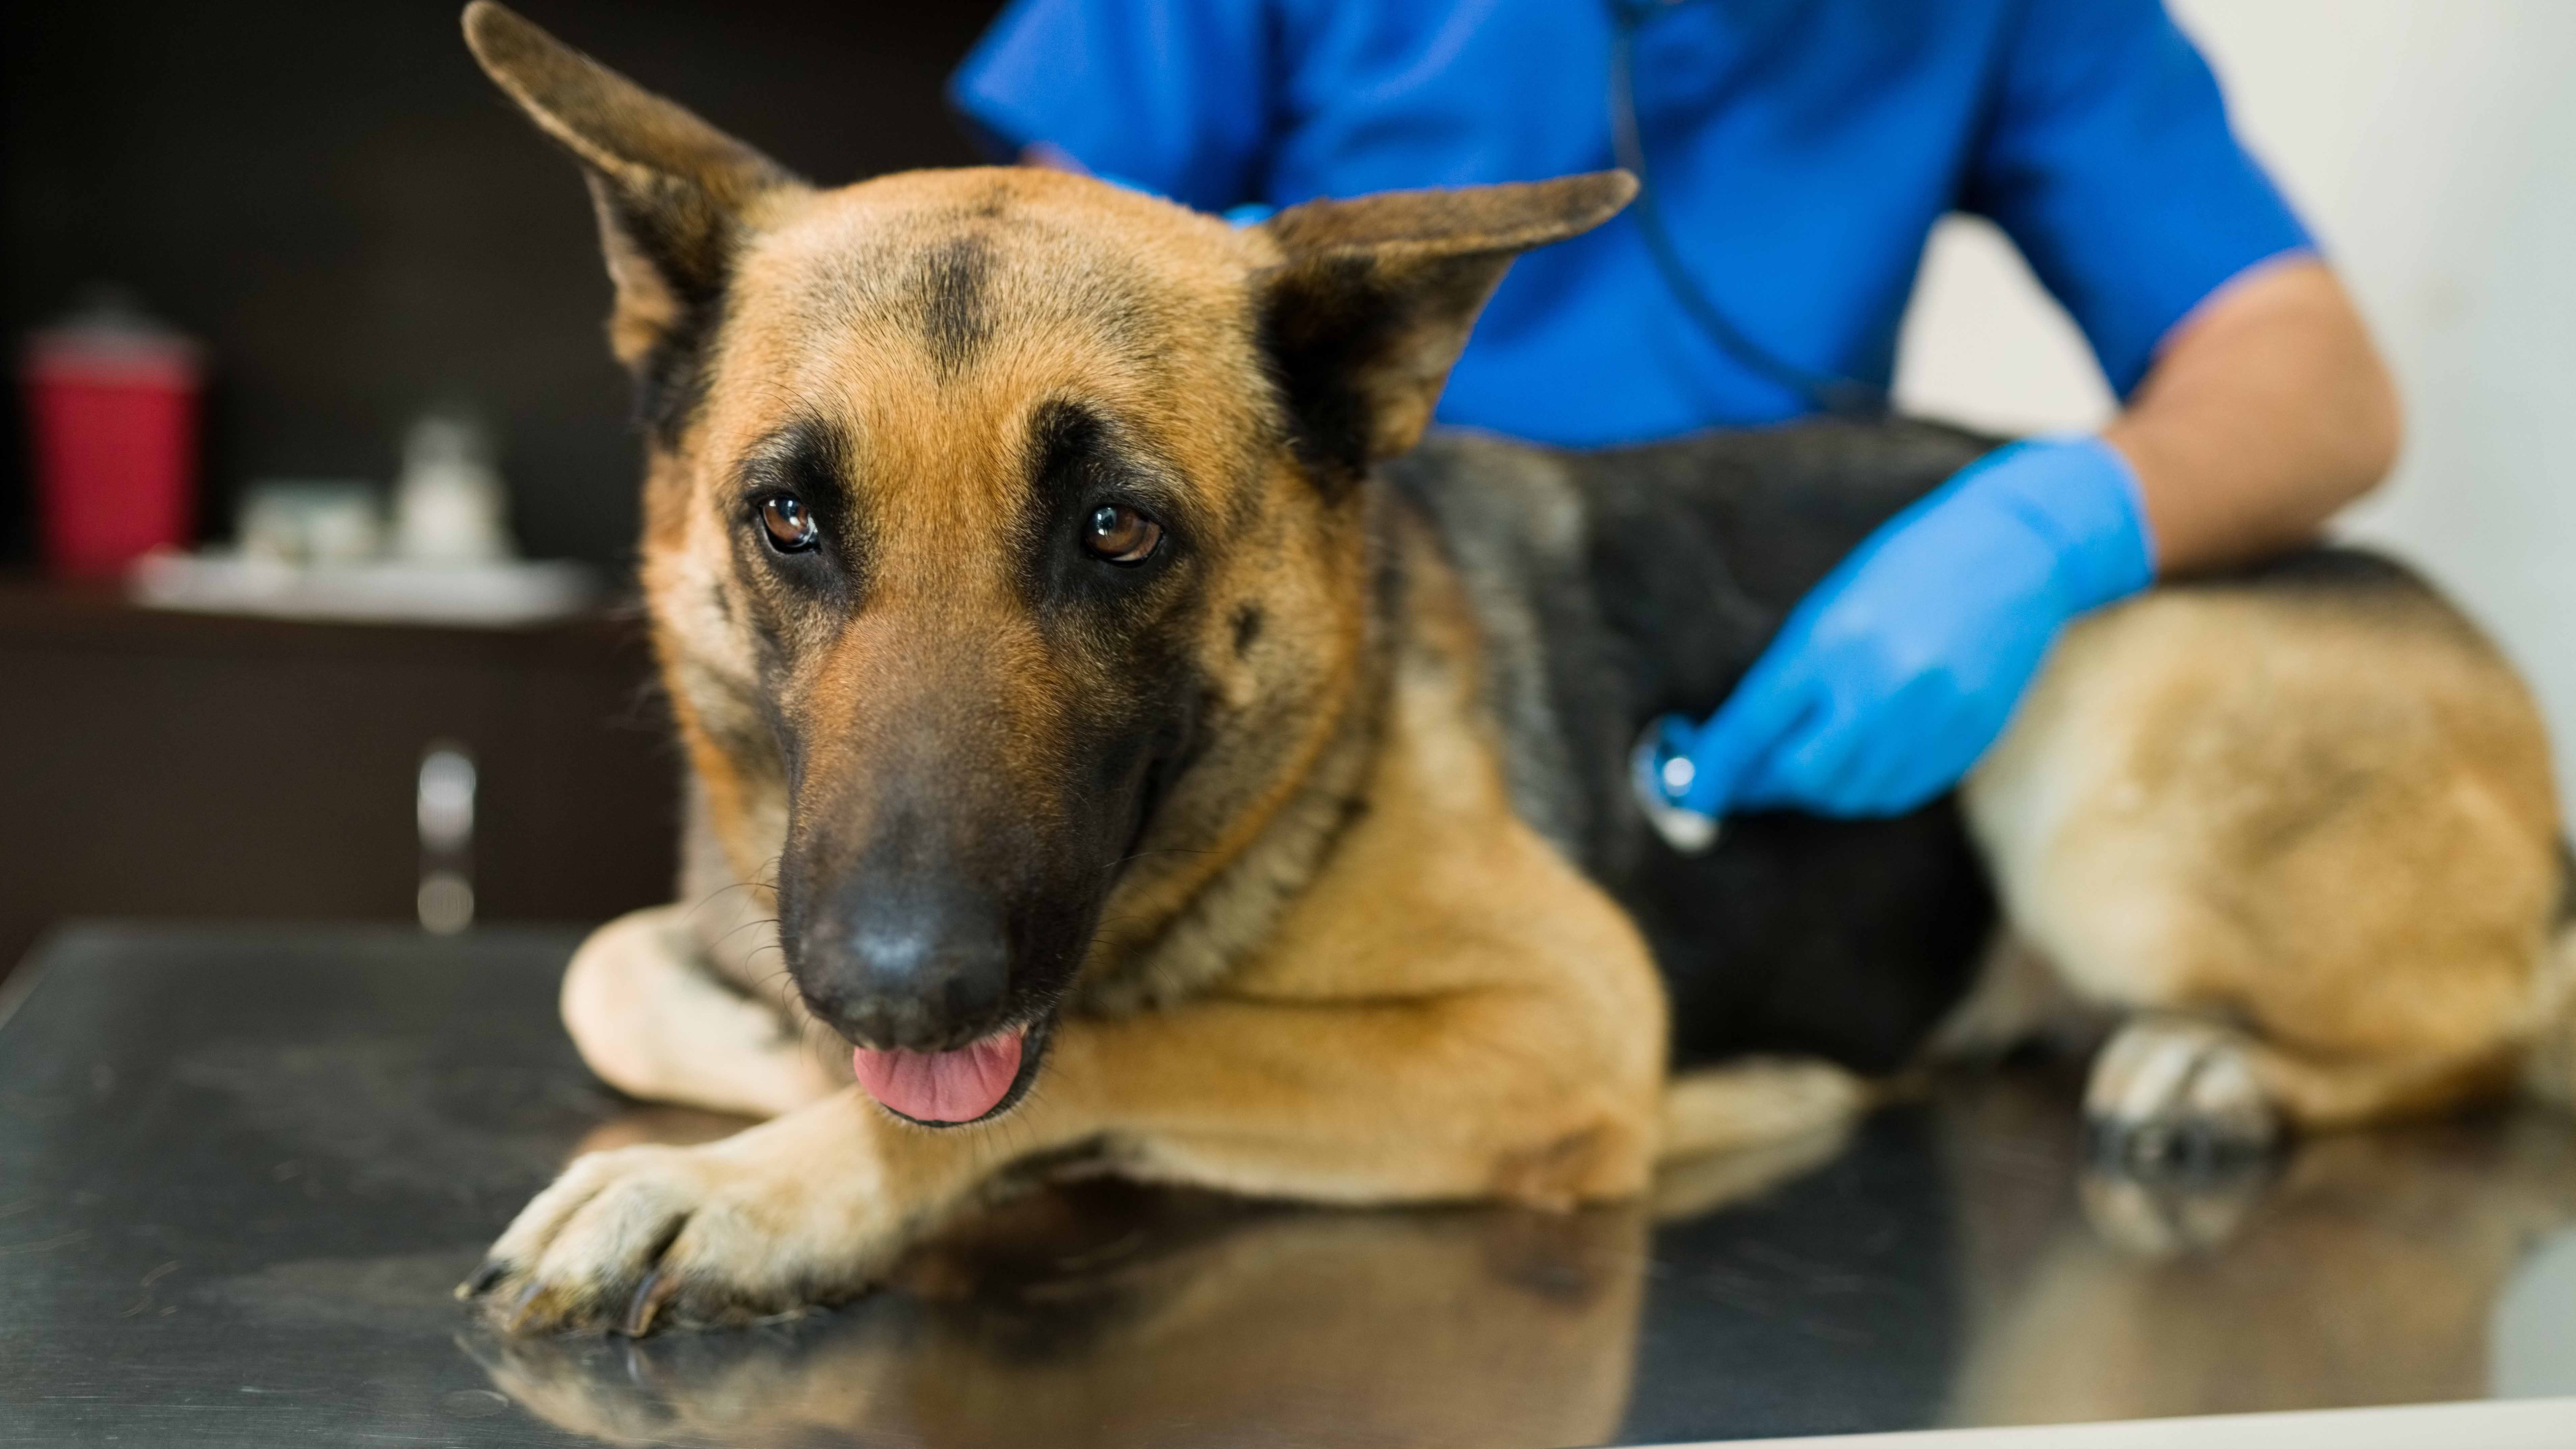 Vaccines for canine influenza can be expensive for shelters to buy, which can make it harder to contain in shelters. (Photo via Shutterstock)